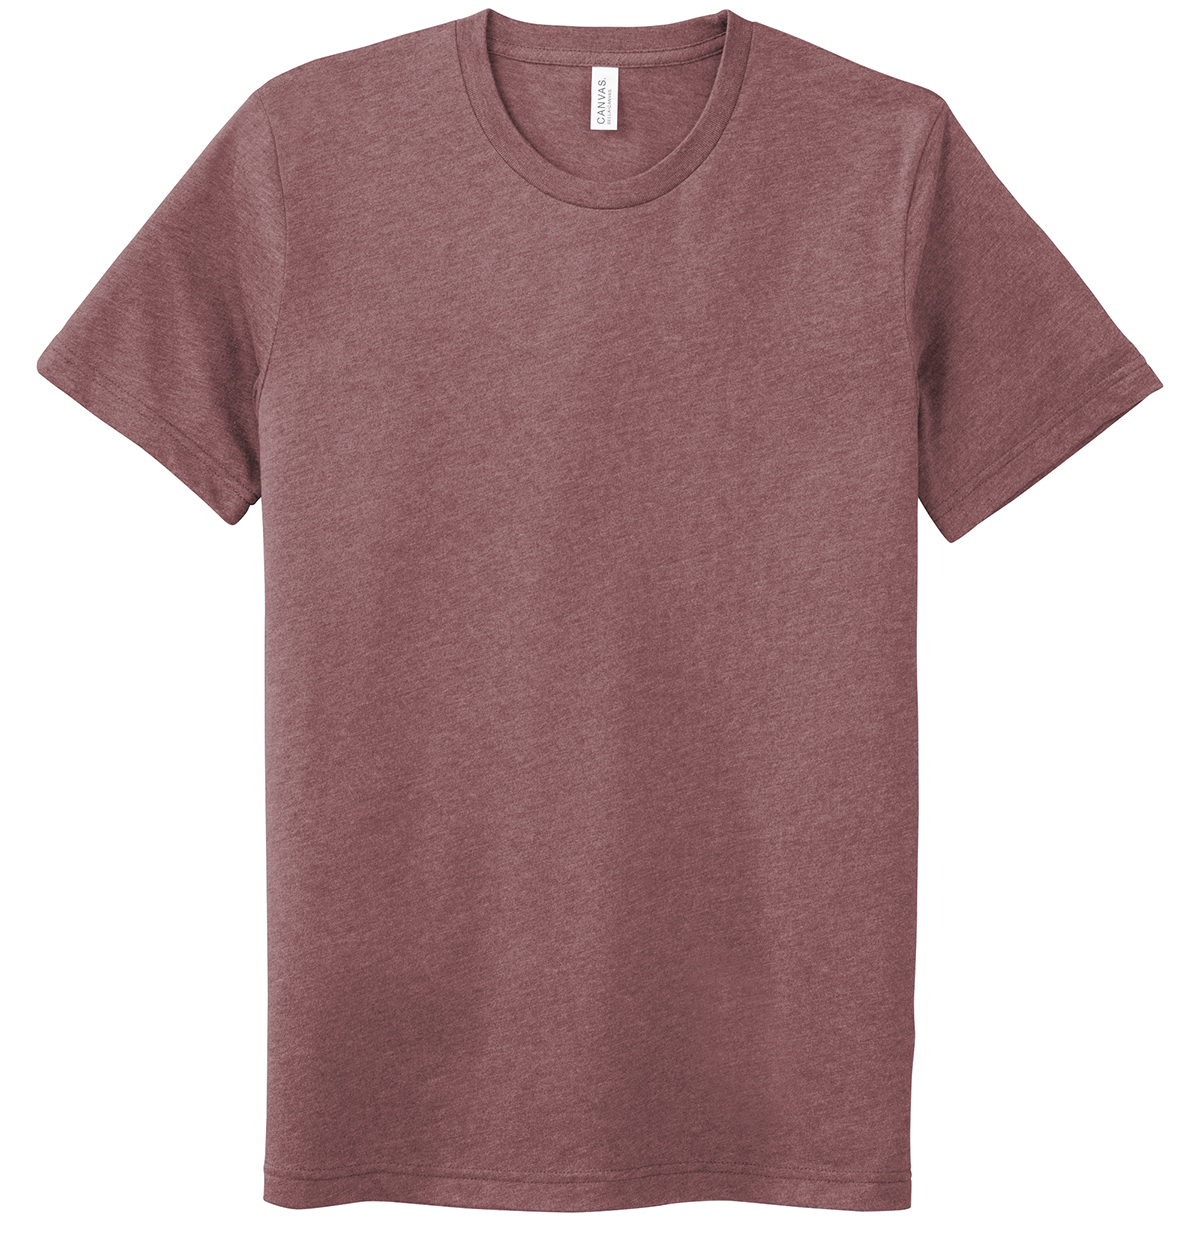 Port & Company Essential Tee (Lime) is a heavyweight T-shirt that is budget-friendly